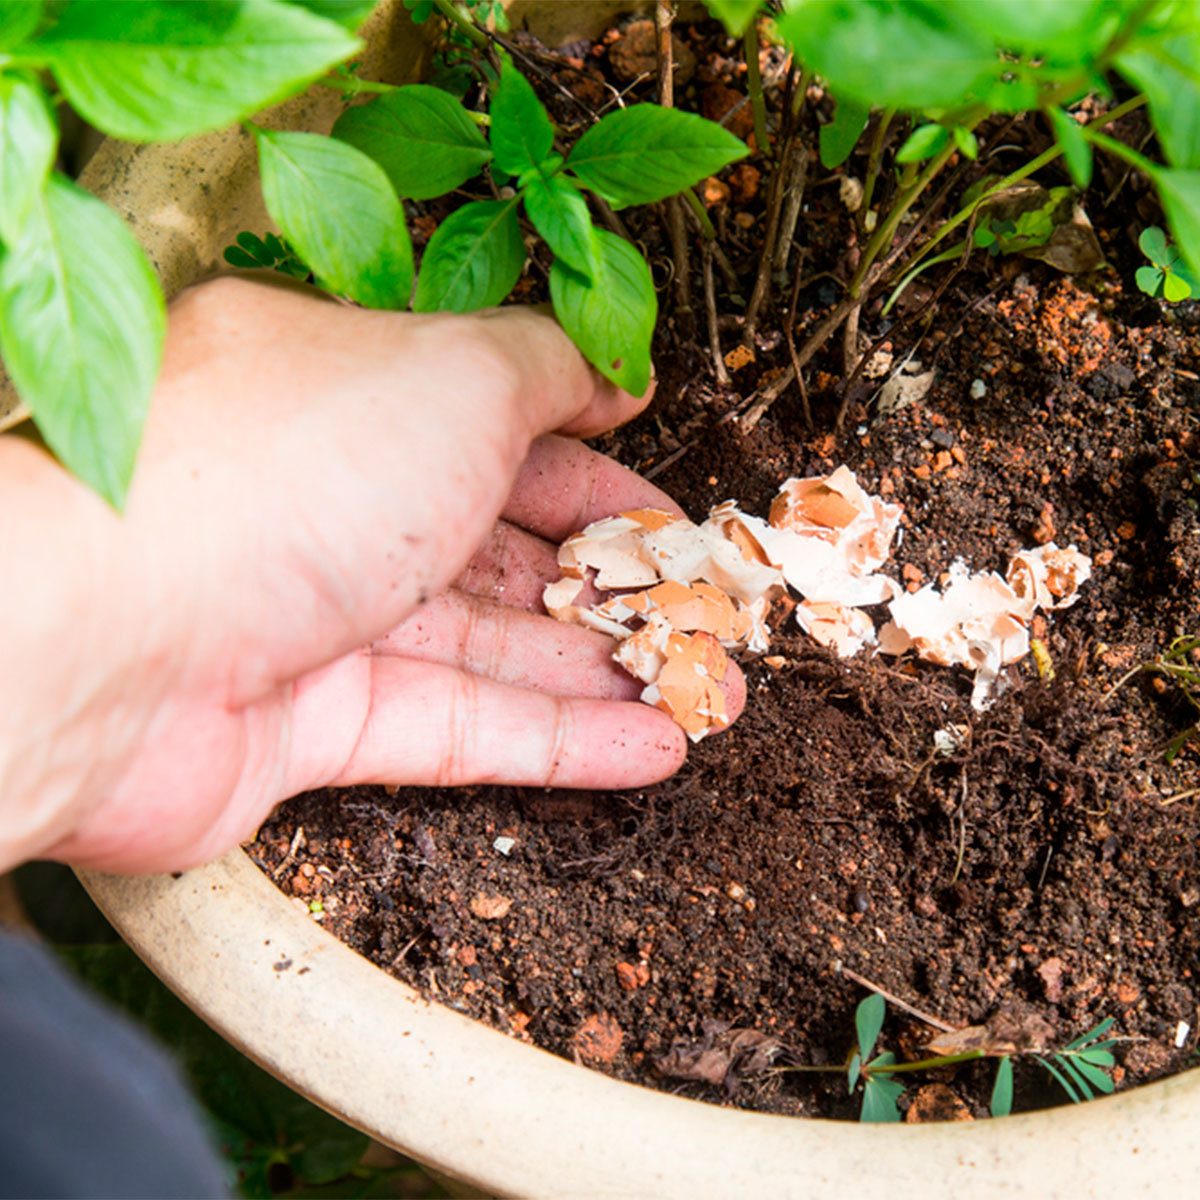 Waste You Should In Your Garden | Family Handyman